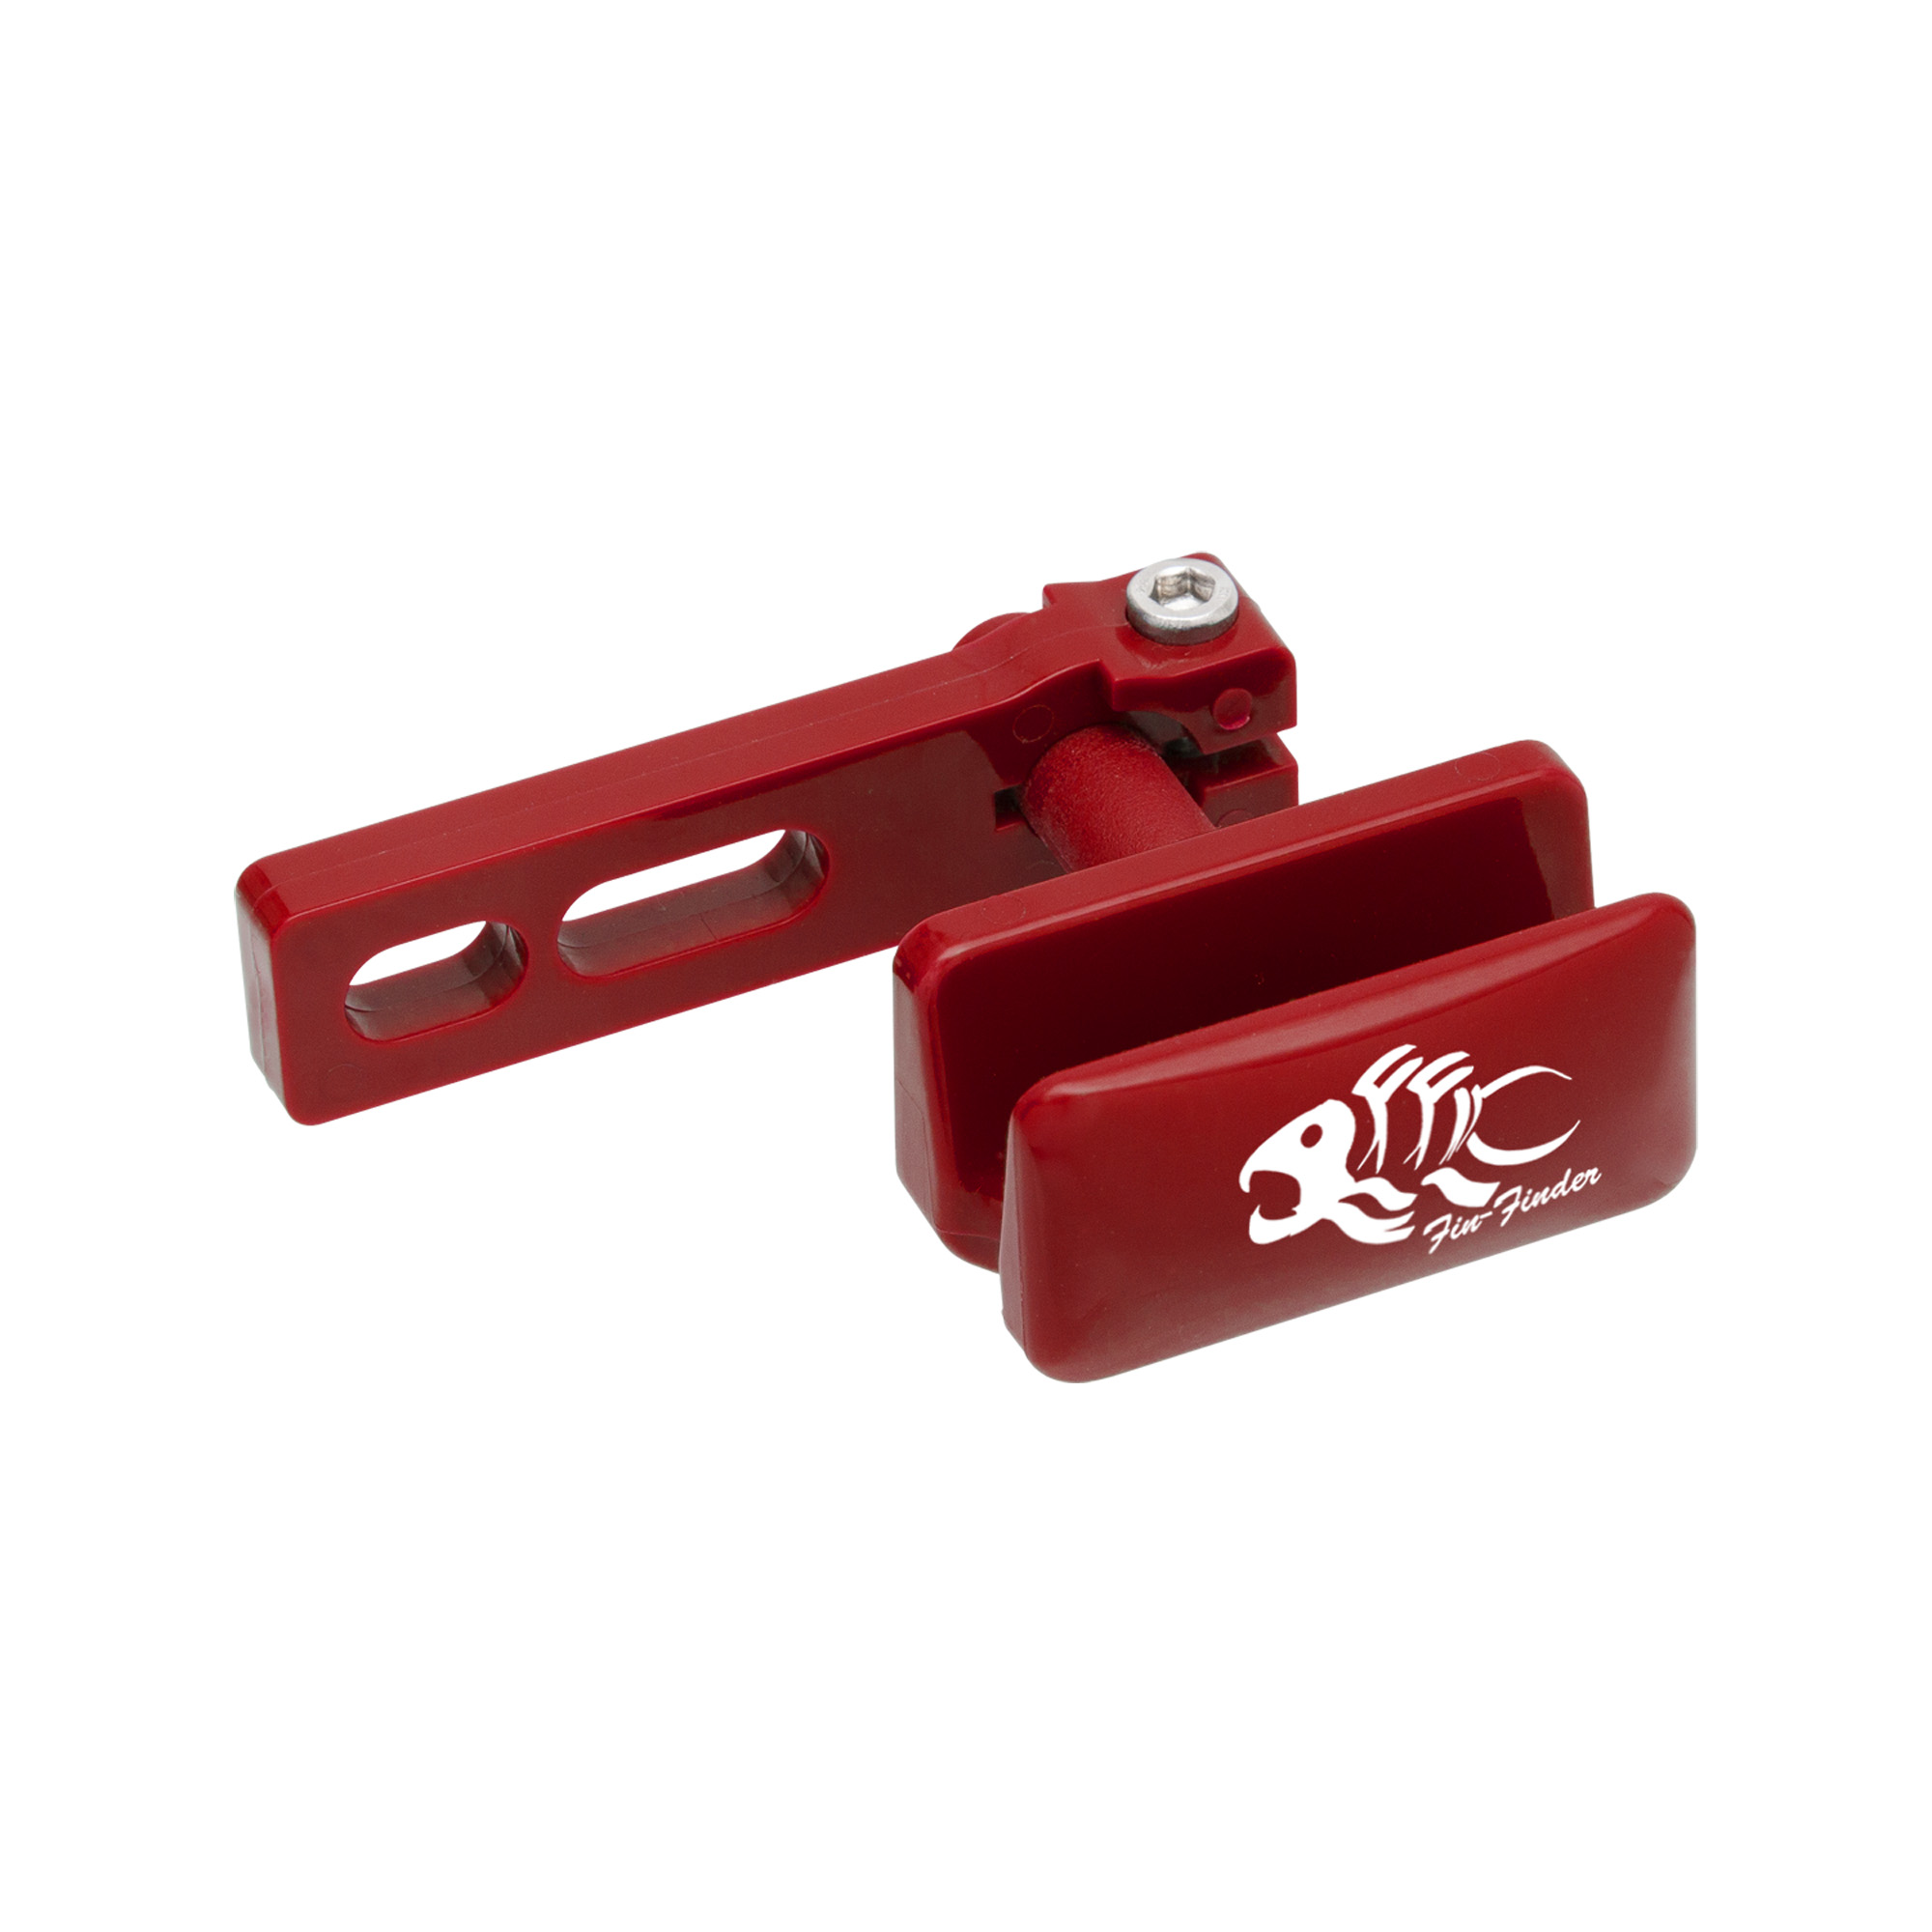 Hydro-Glide Rest - Red, Stainless Steel